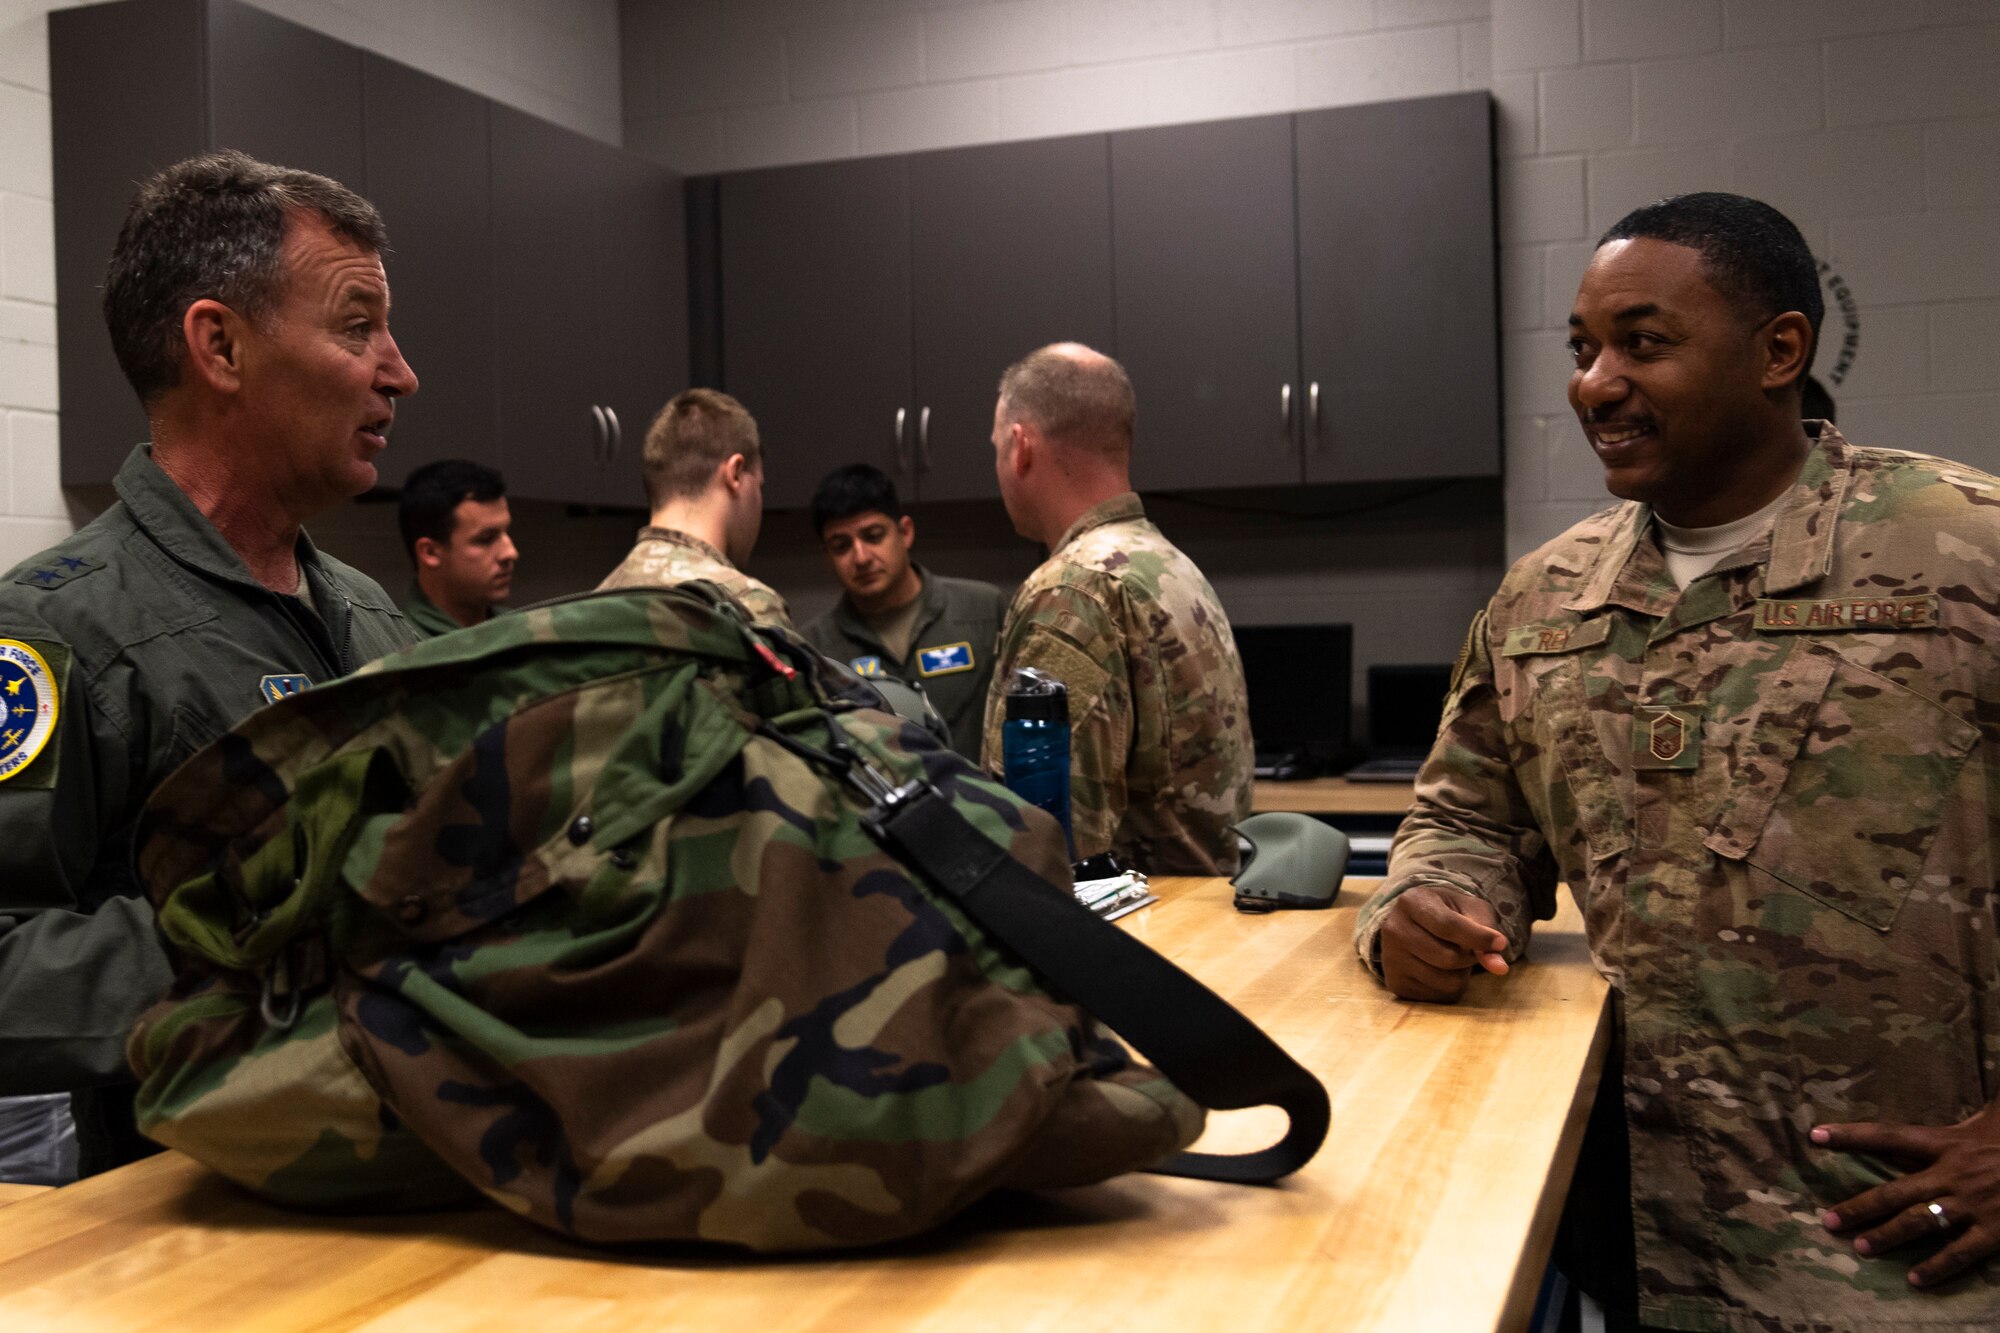 U.S. Air Force Maj. Gen. Chad Franks, left, Ninth Air Force commander, talks with Senior Master Sgt. Dante Rey, 347th Operations Support Squadron superintendent, before a flight at Moody Air Force Base, Ga., Aug. 8, 2019. It was Franks’ initial flight in the Ninth Air Force commander’s flagship aircraft, an HH-60G Pave Hawk assigned to the 41st Rescue Squadron. Franks, who on separate occasions served as the commander for the 23d Wing and 347th Rescue Group, is a command pilot with more than 3,300 hours in multiple aircraft including HC-130J Combat King II and HH-60G Pave Hawk. (U.S. Air Force photo by Airman 1st Class Taryn Butler)